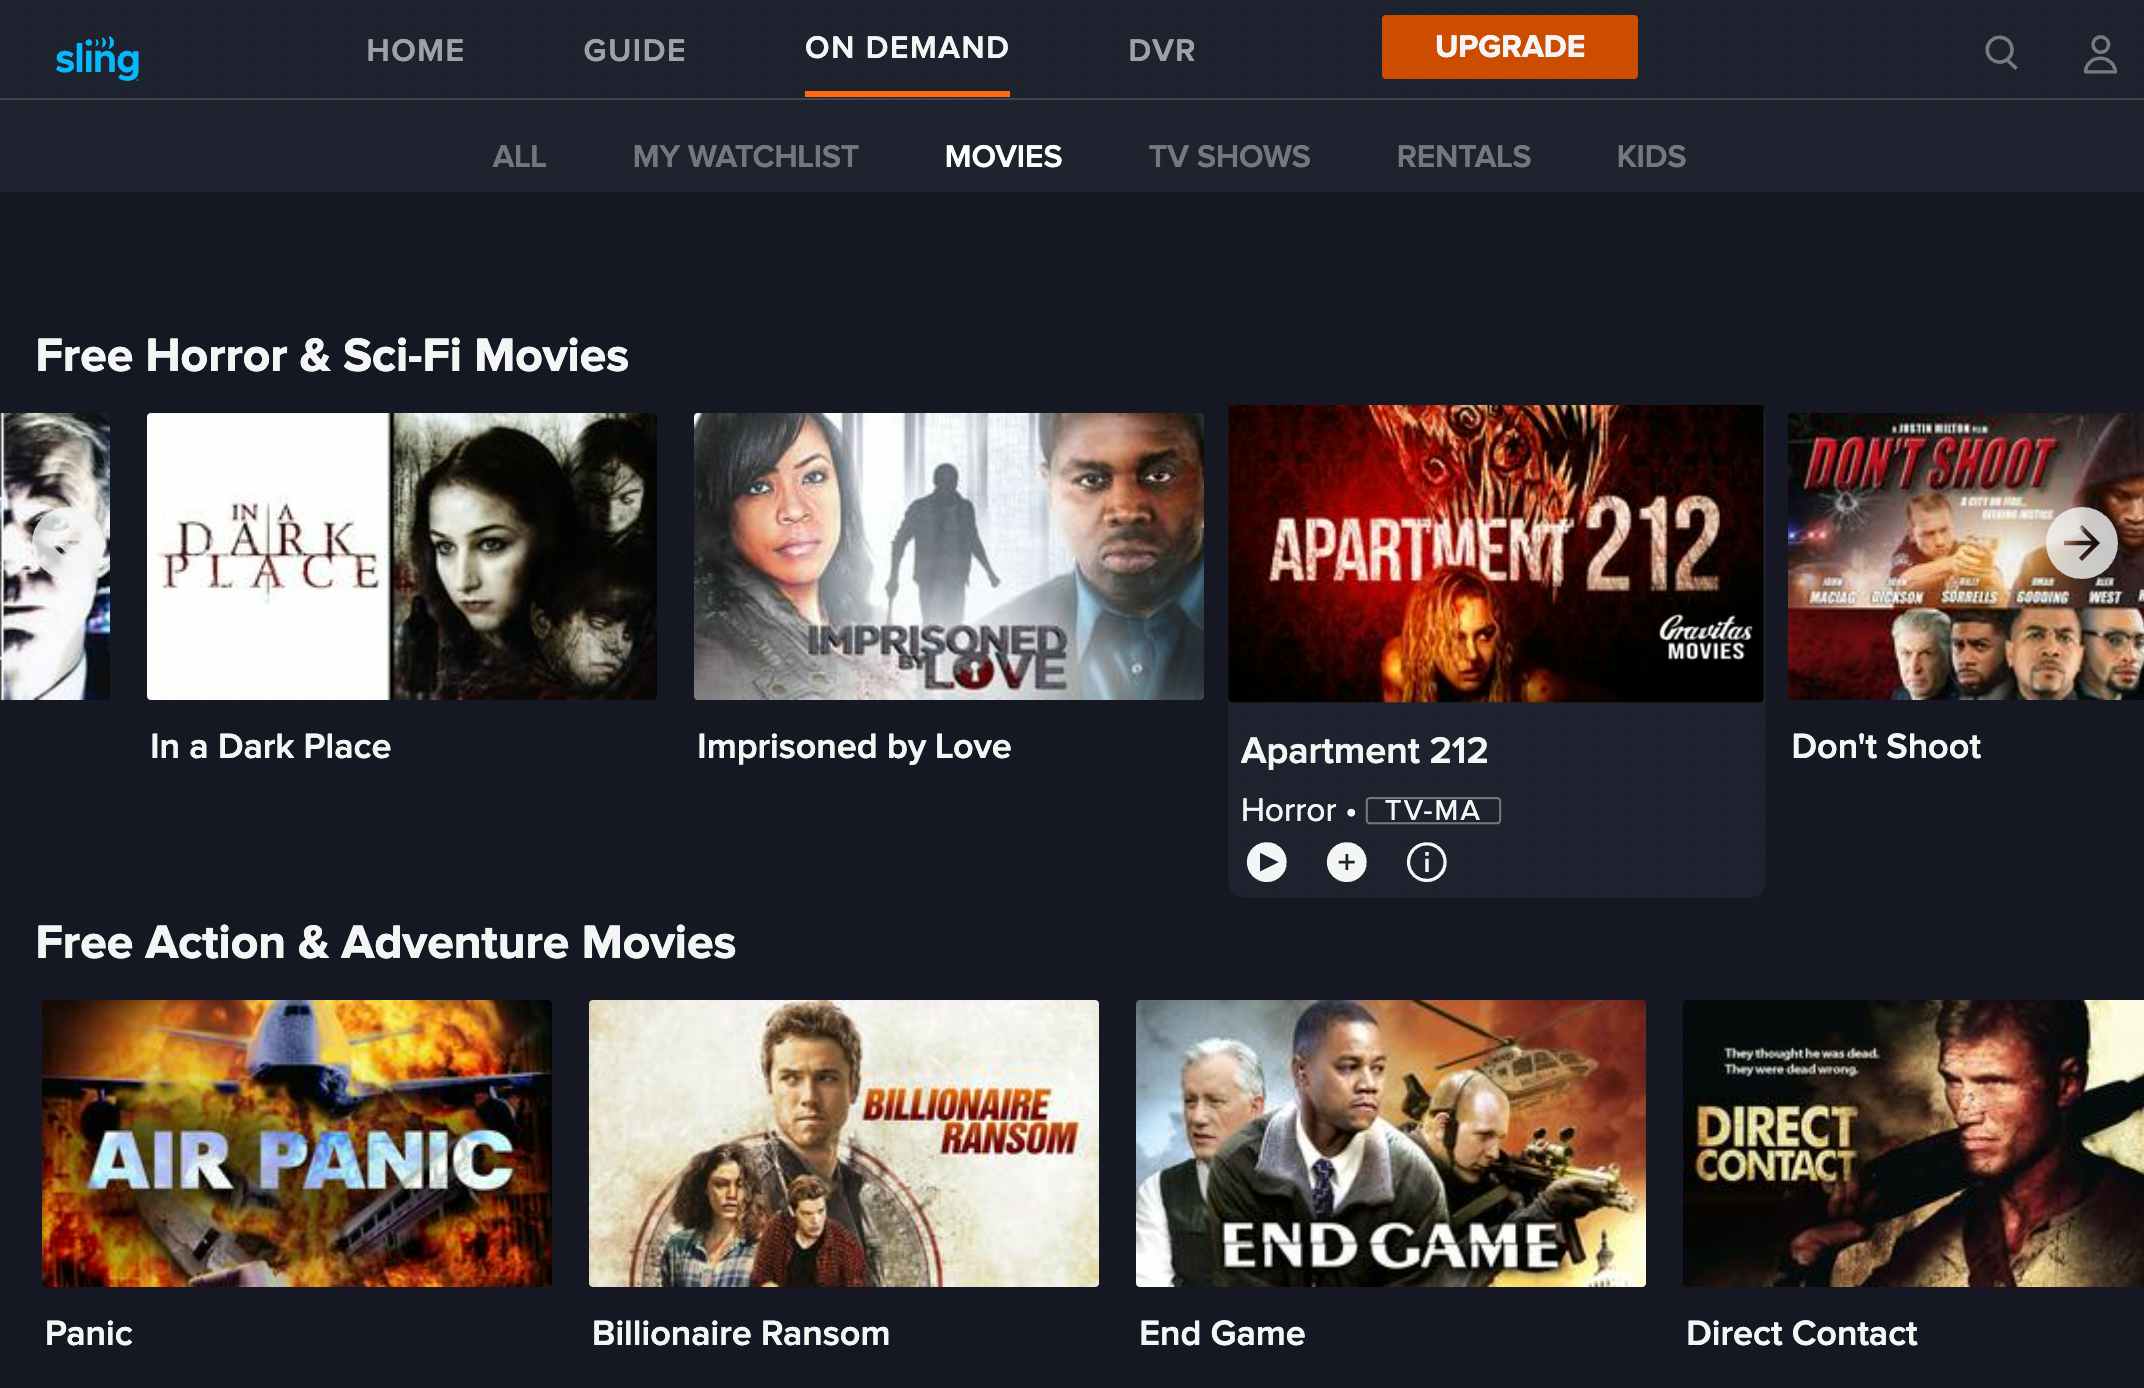 A screenshot of the free Halloween movies list on Sling TV's website.